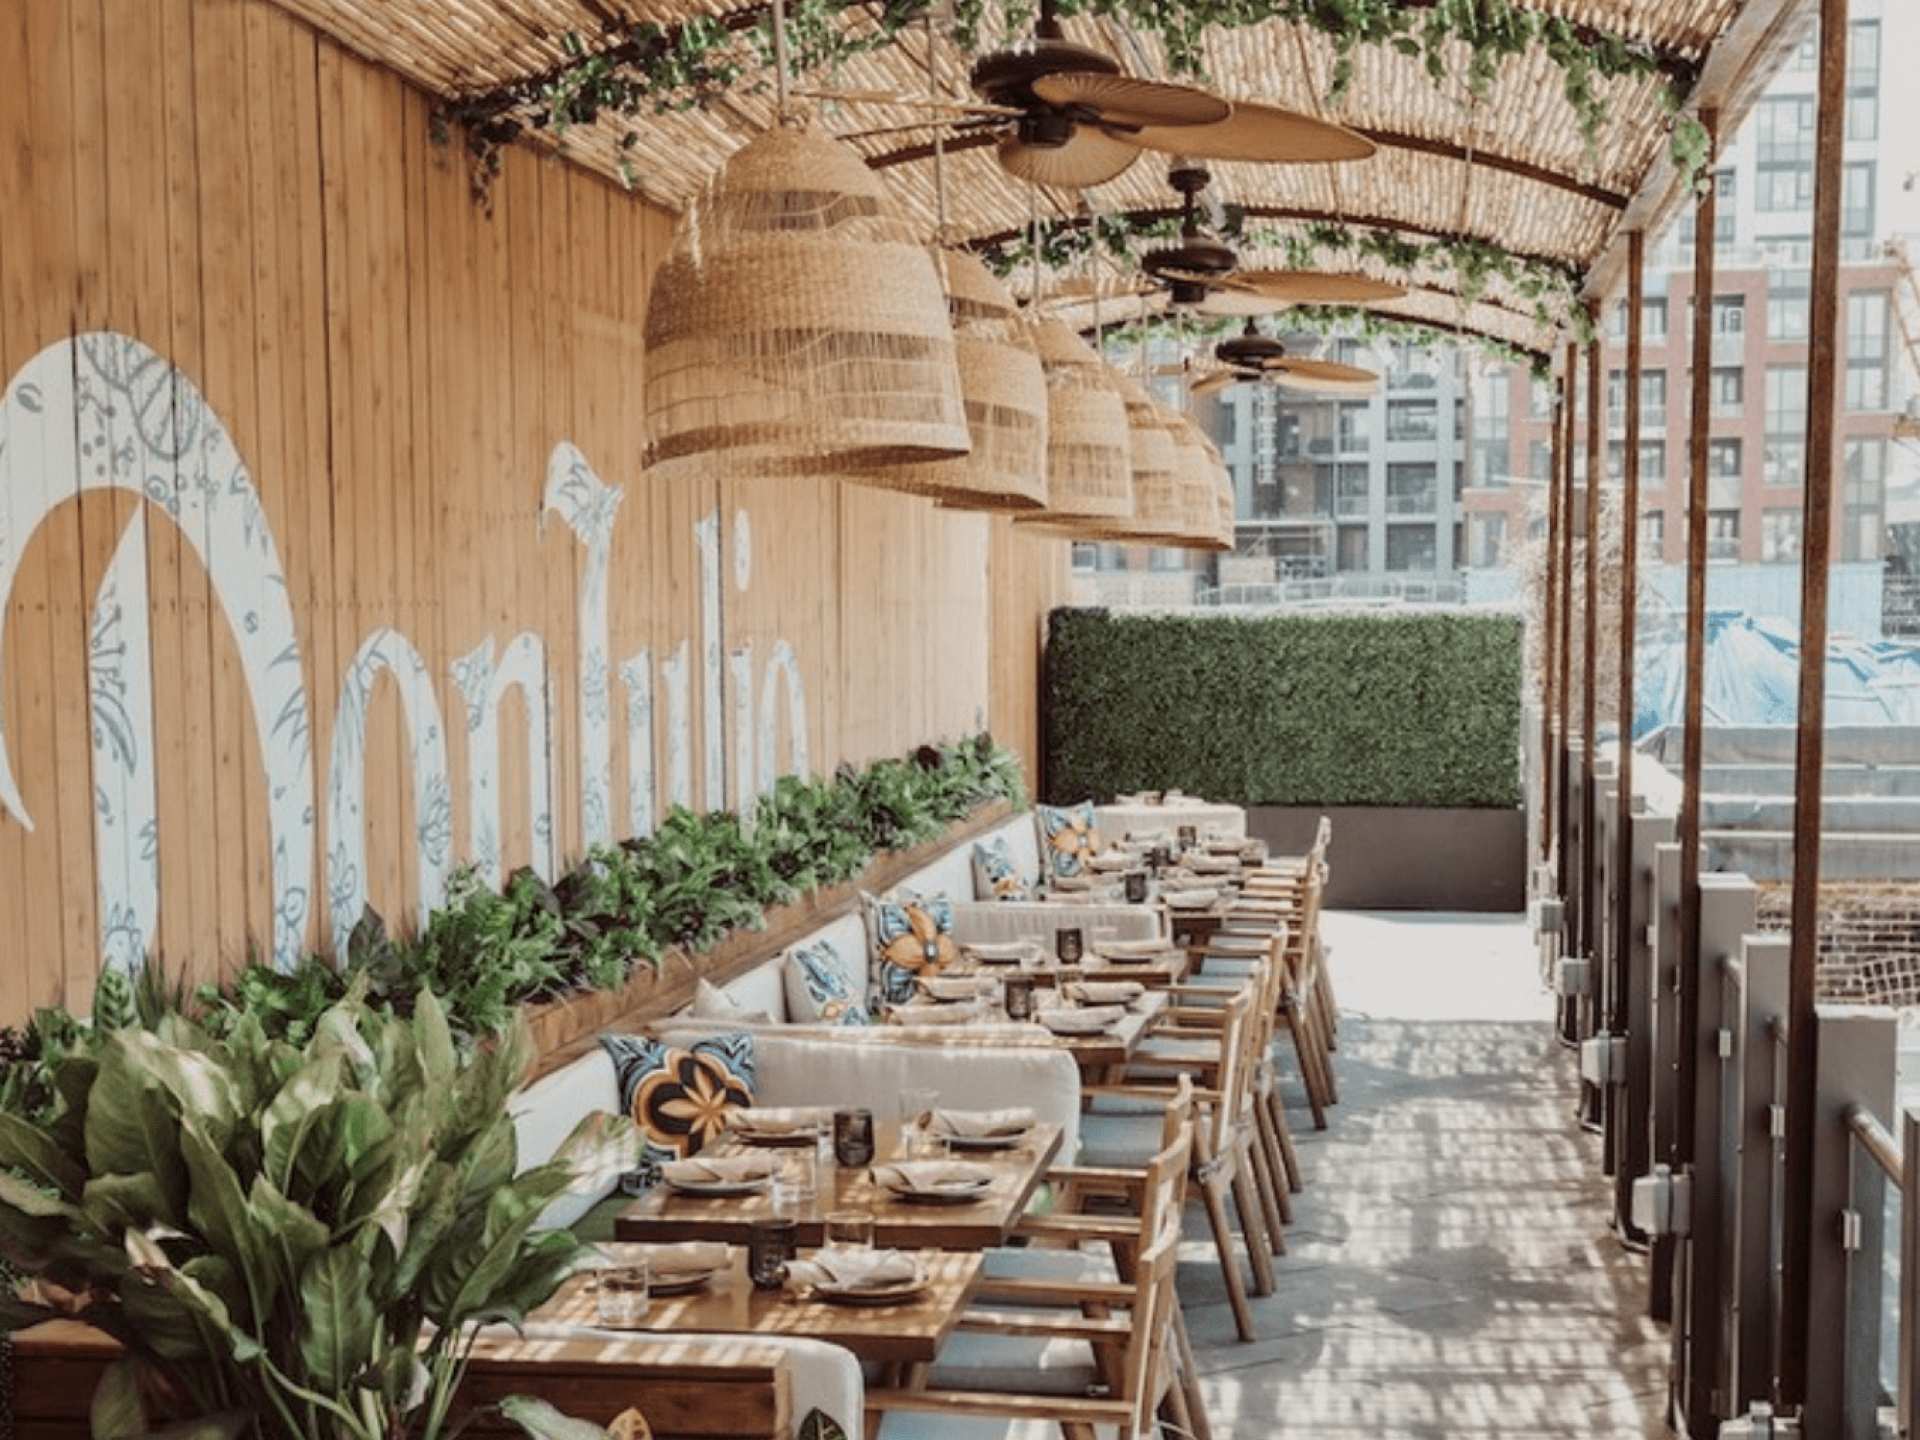 Summerlicious Toronto | The covered rooftop patio at Baro